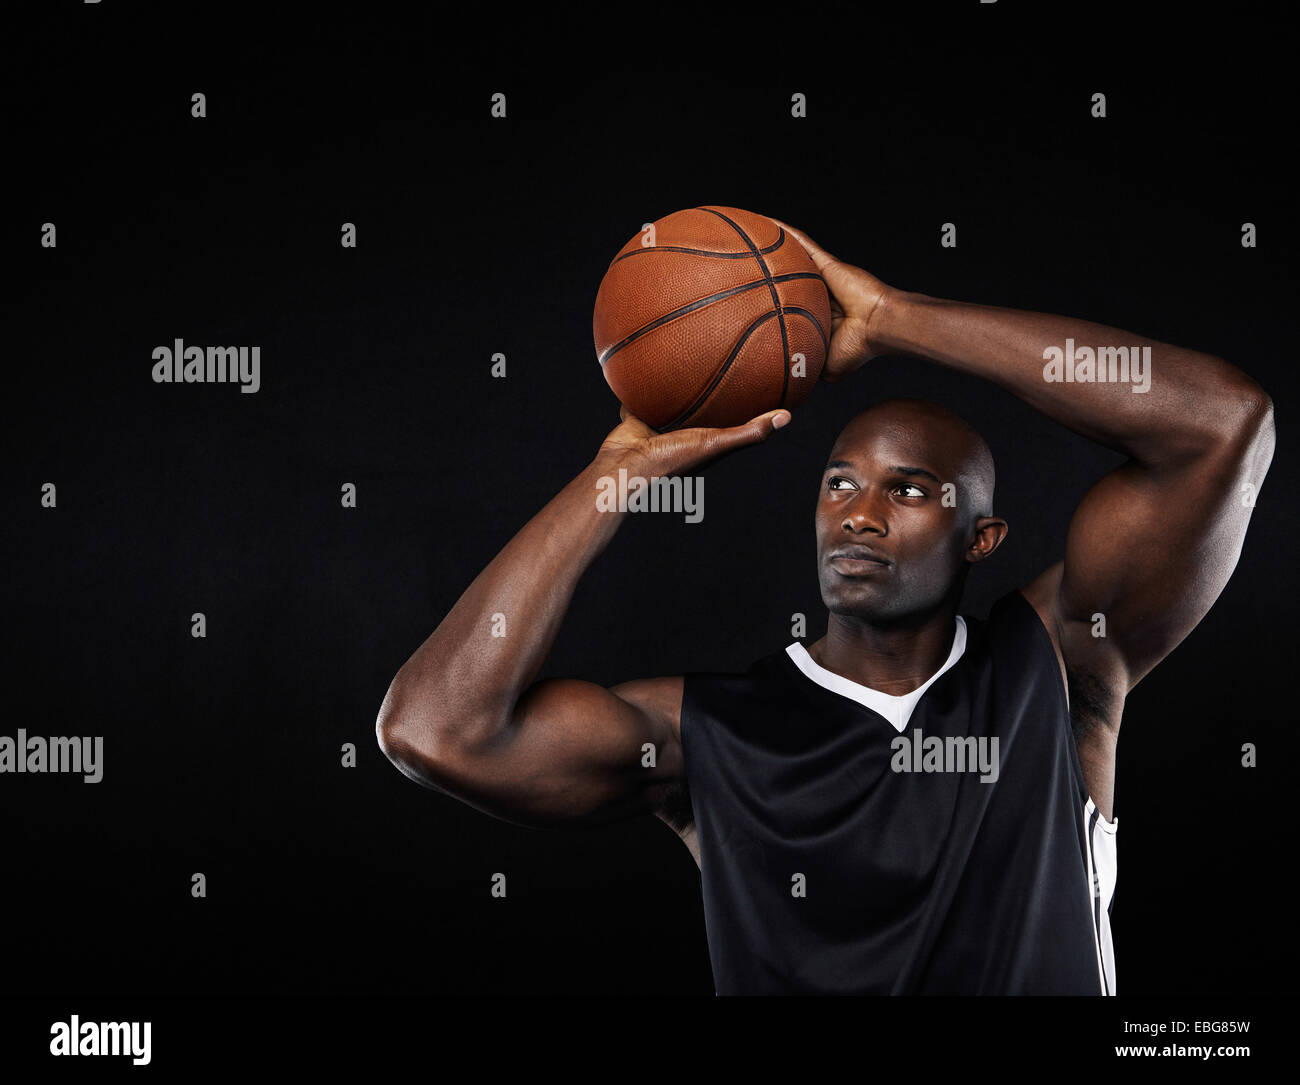 Young African American male basketball player shooting at the hoop against black background Stock Photo